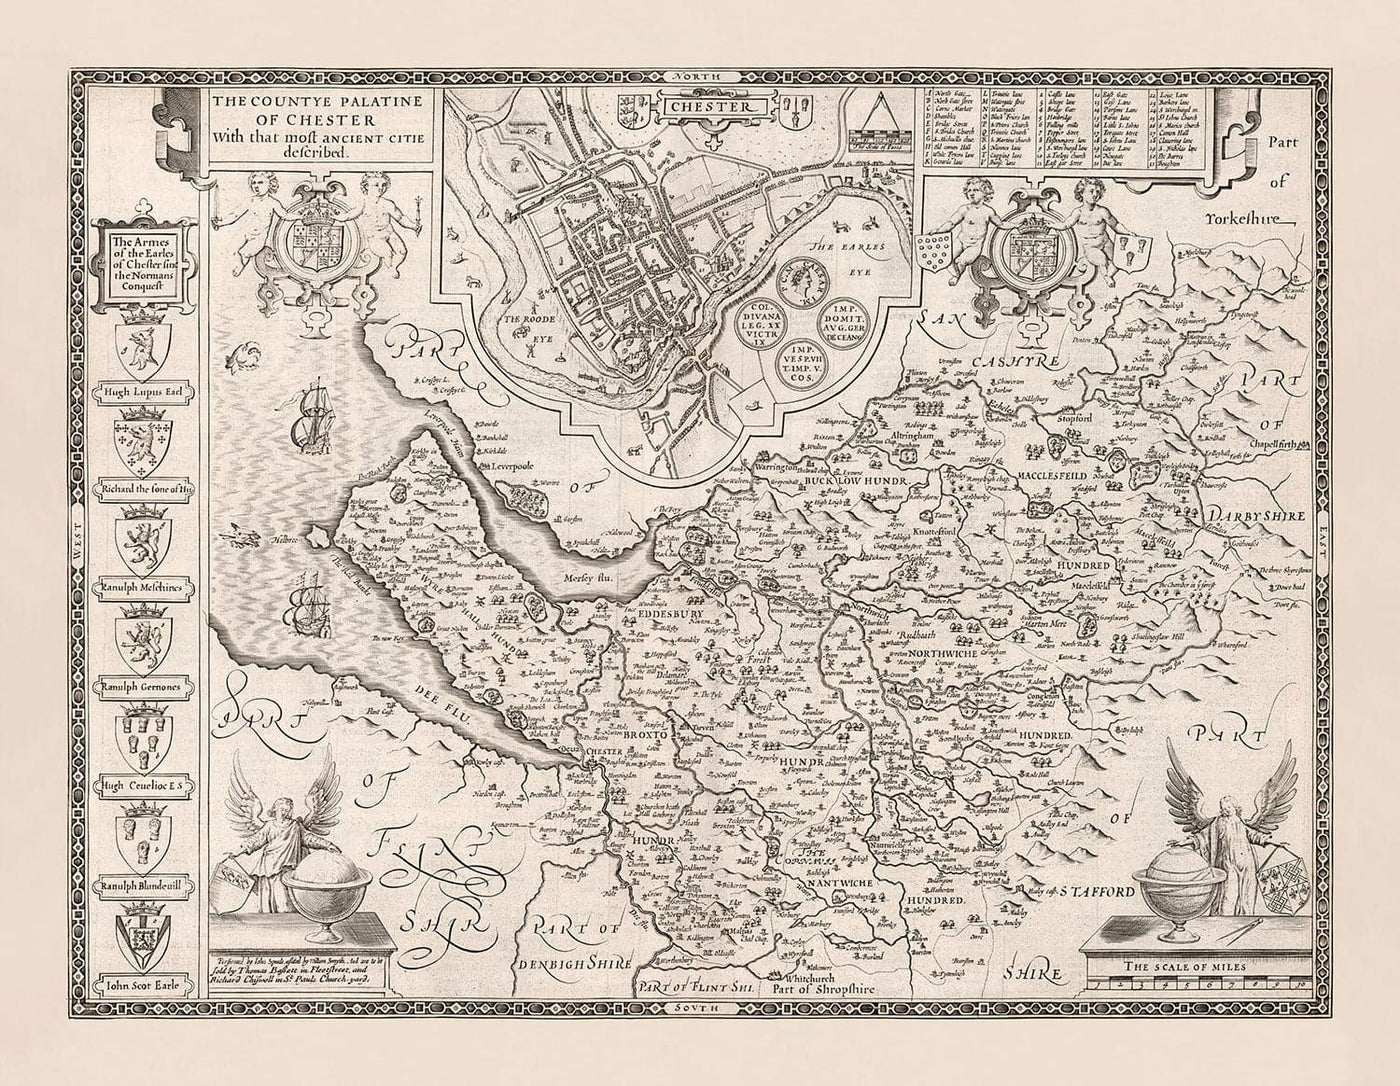 Old Monochrome Map of Cheshire in 1611 - Chester, Warrington, Crewe, Runcorn, Liverpool, Wirral, Merseyside